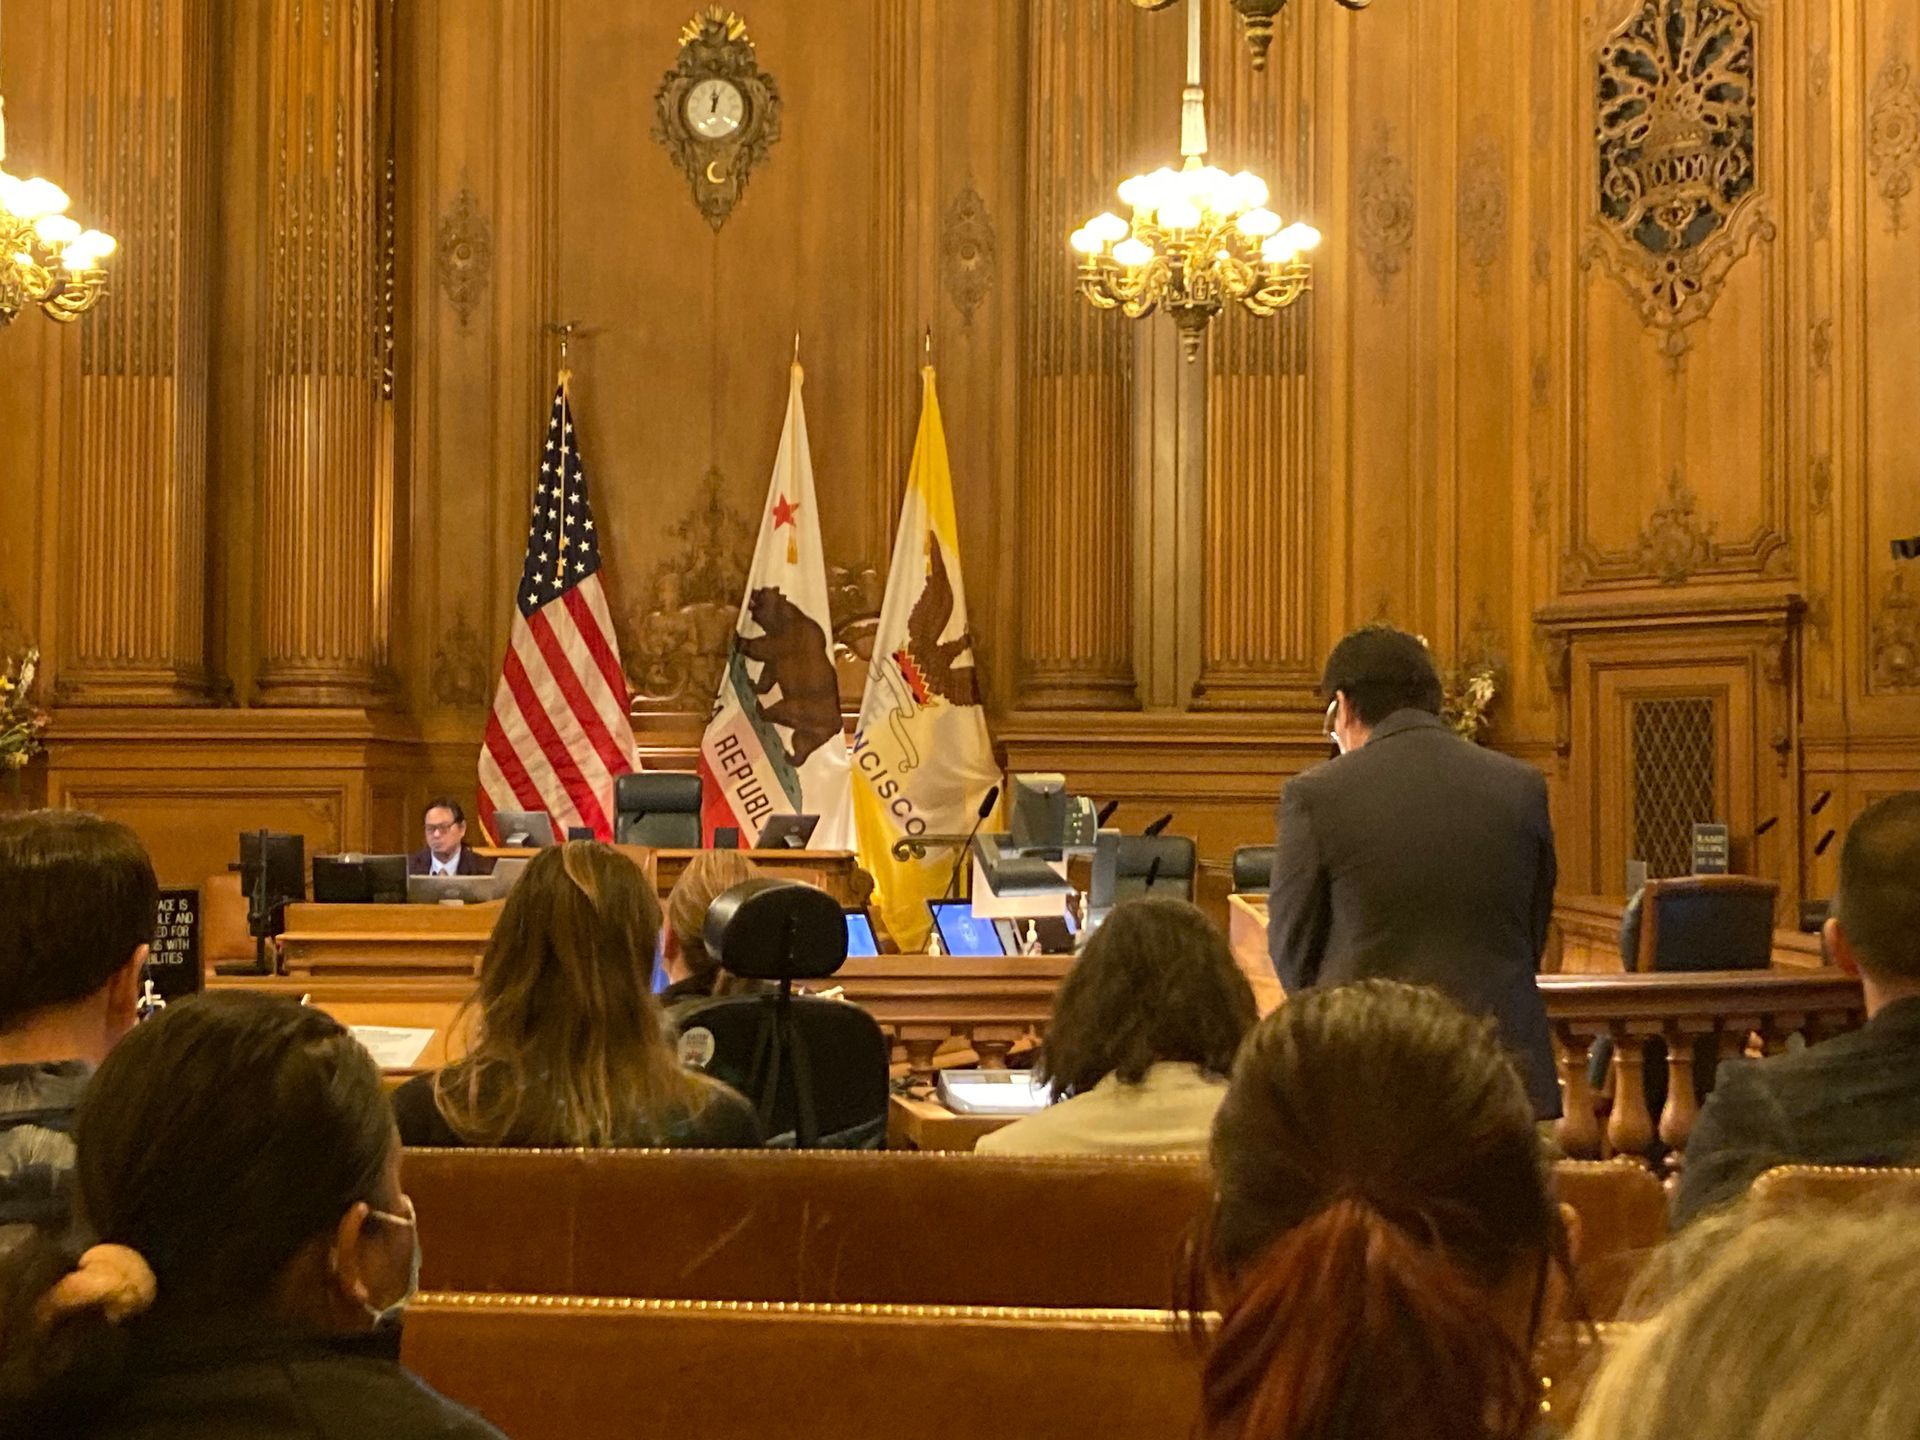 A shot of the courtroom, it has tan walls with lots of ornamental designs. There are 3 flags on the wall, the US flag, California Republic, and San Francisco's flag. 